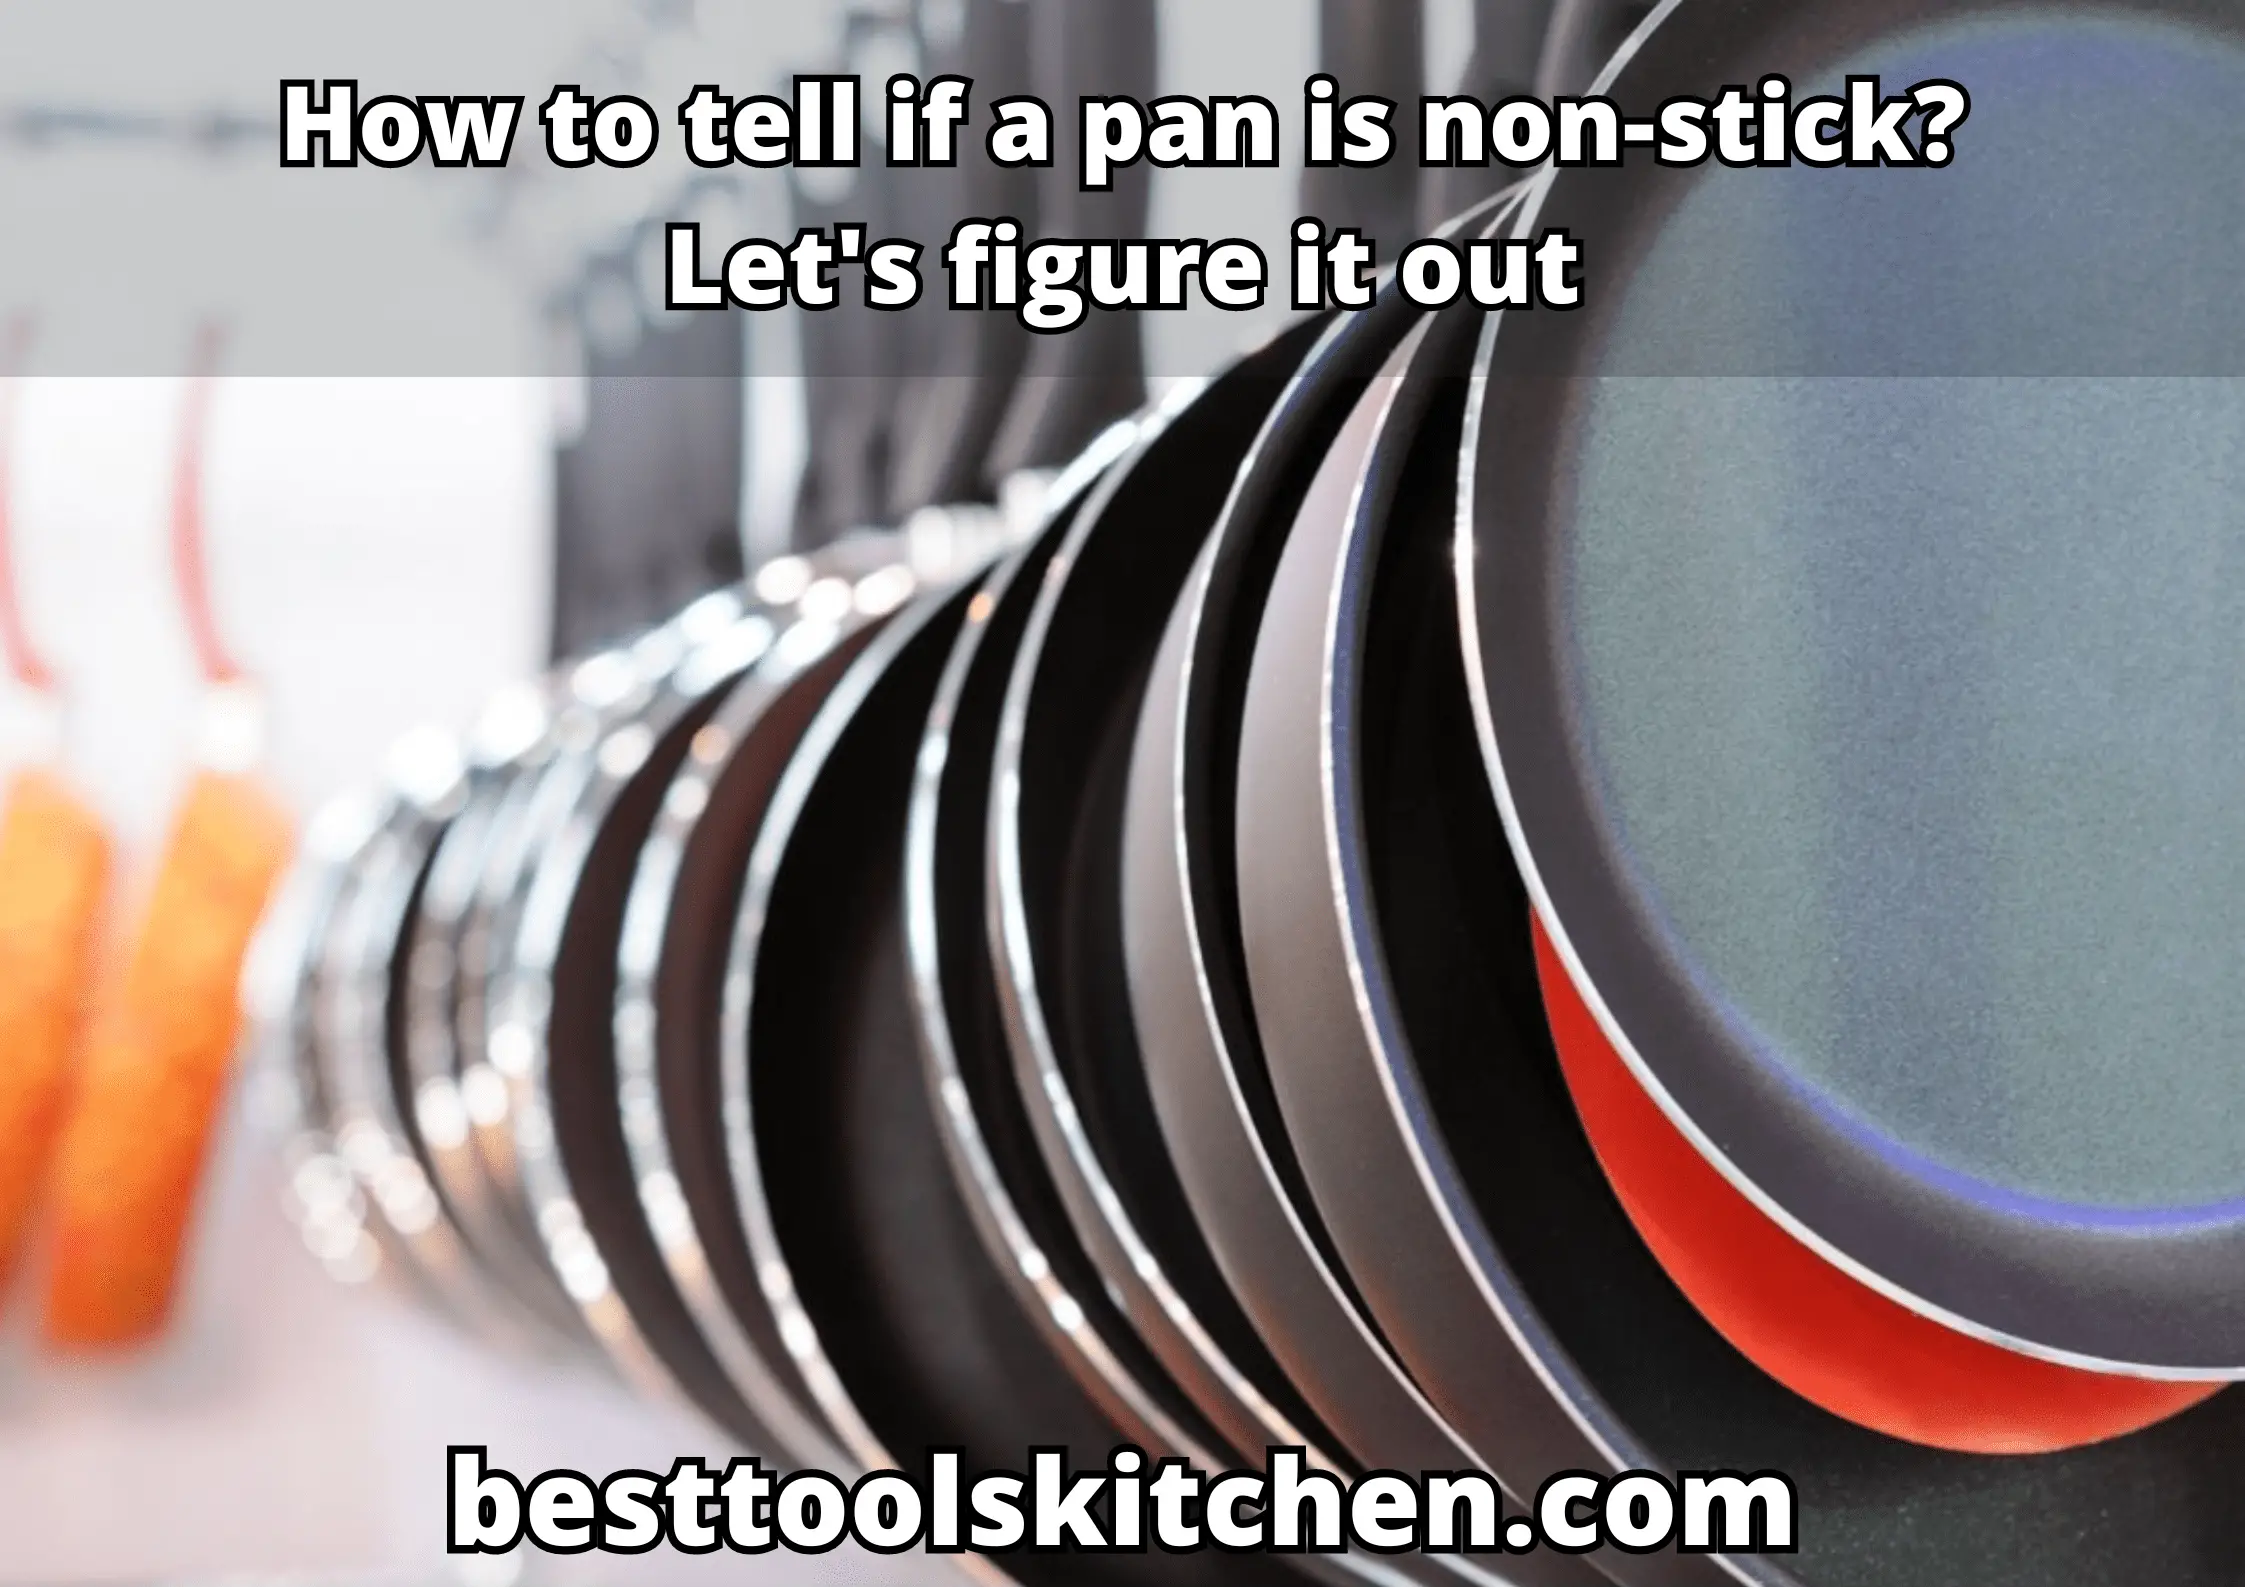 How to tell if a pan is non-stick